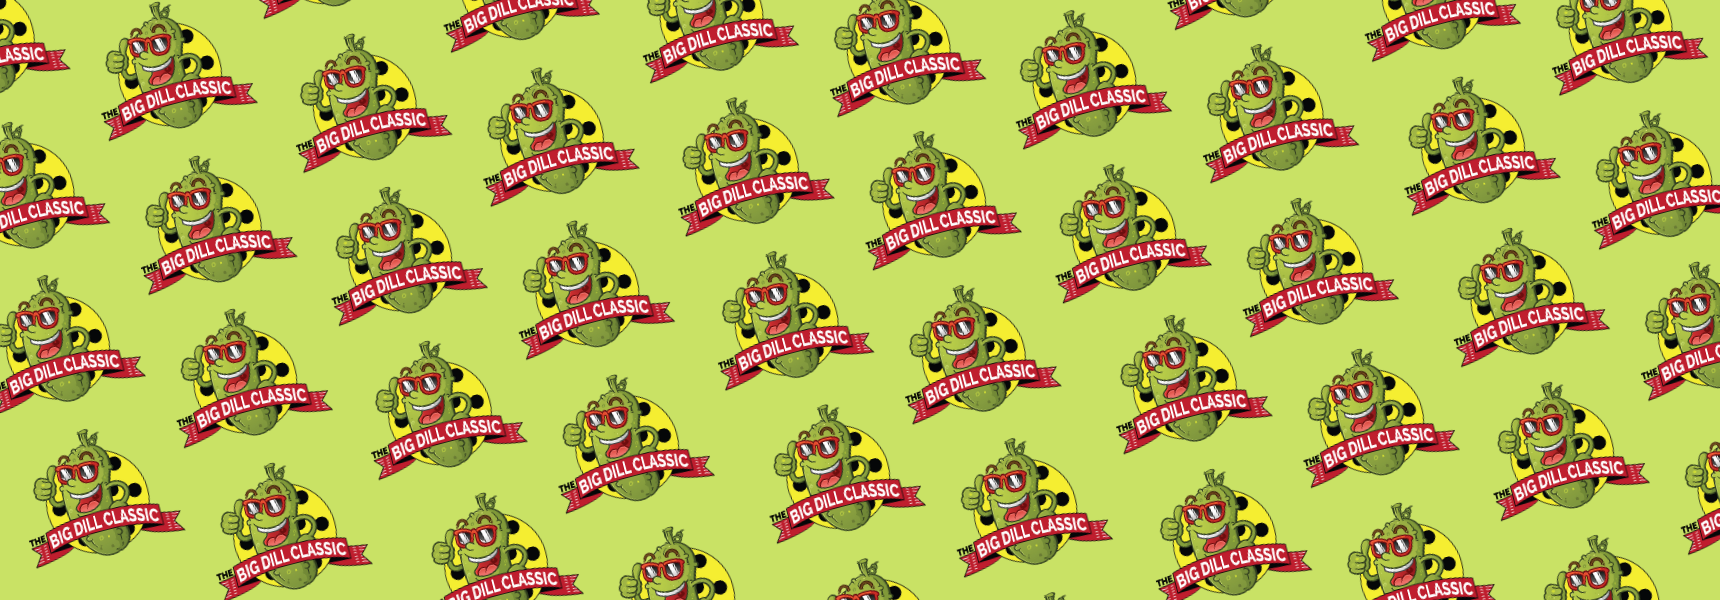 Graphic repeating background with Big Dill Classic logo